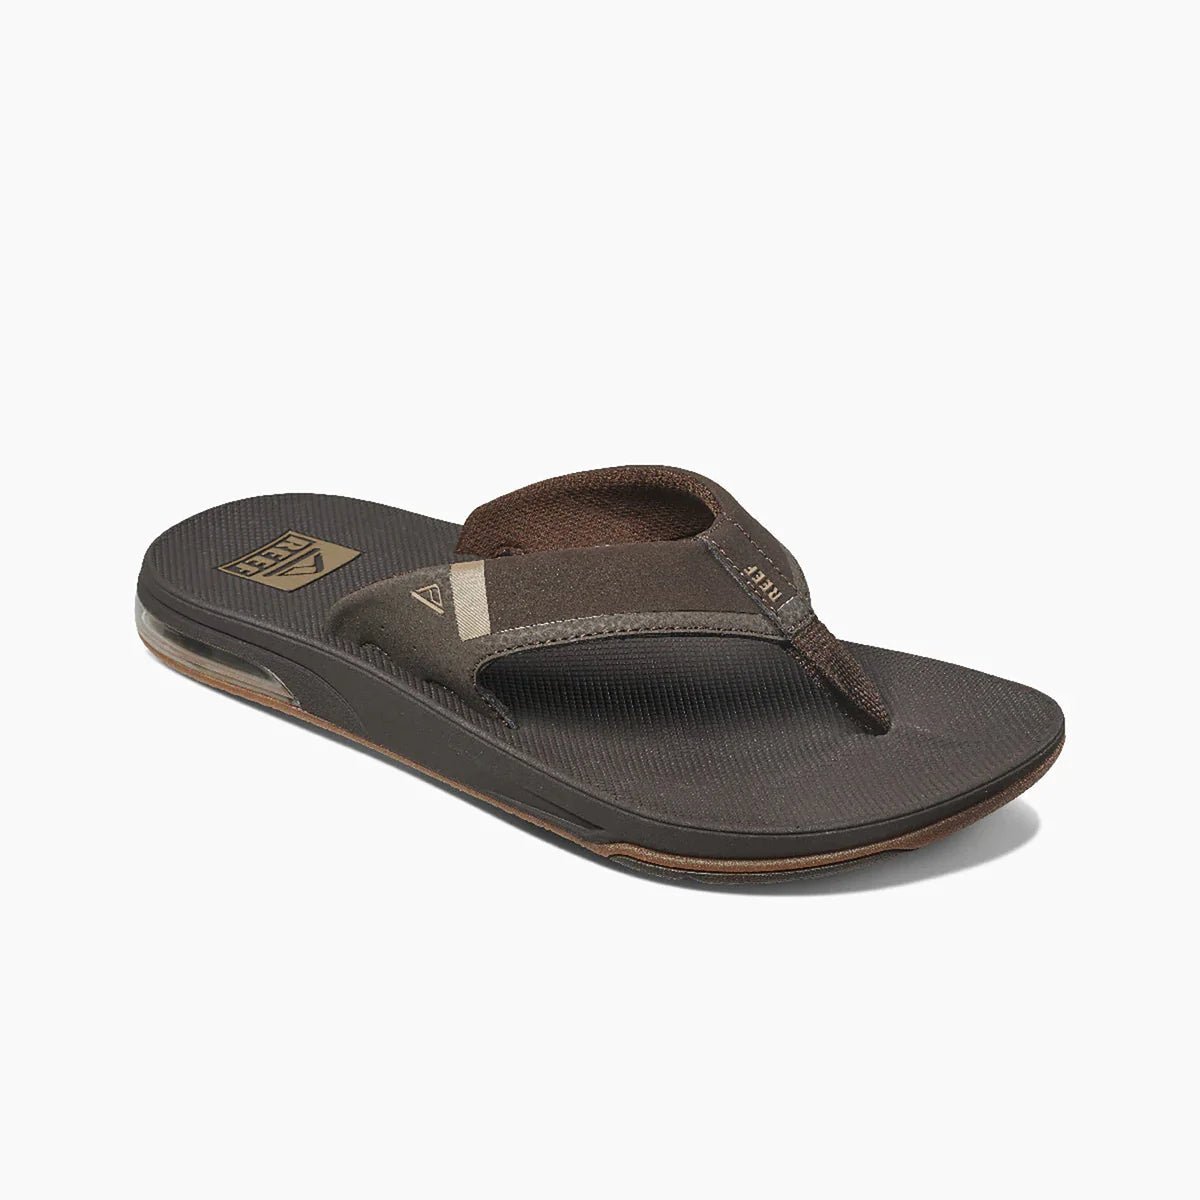 Mens REEF Fanning Low Sandals - Worthing Watersports - Shoes - REEF